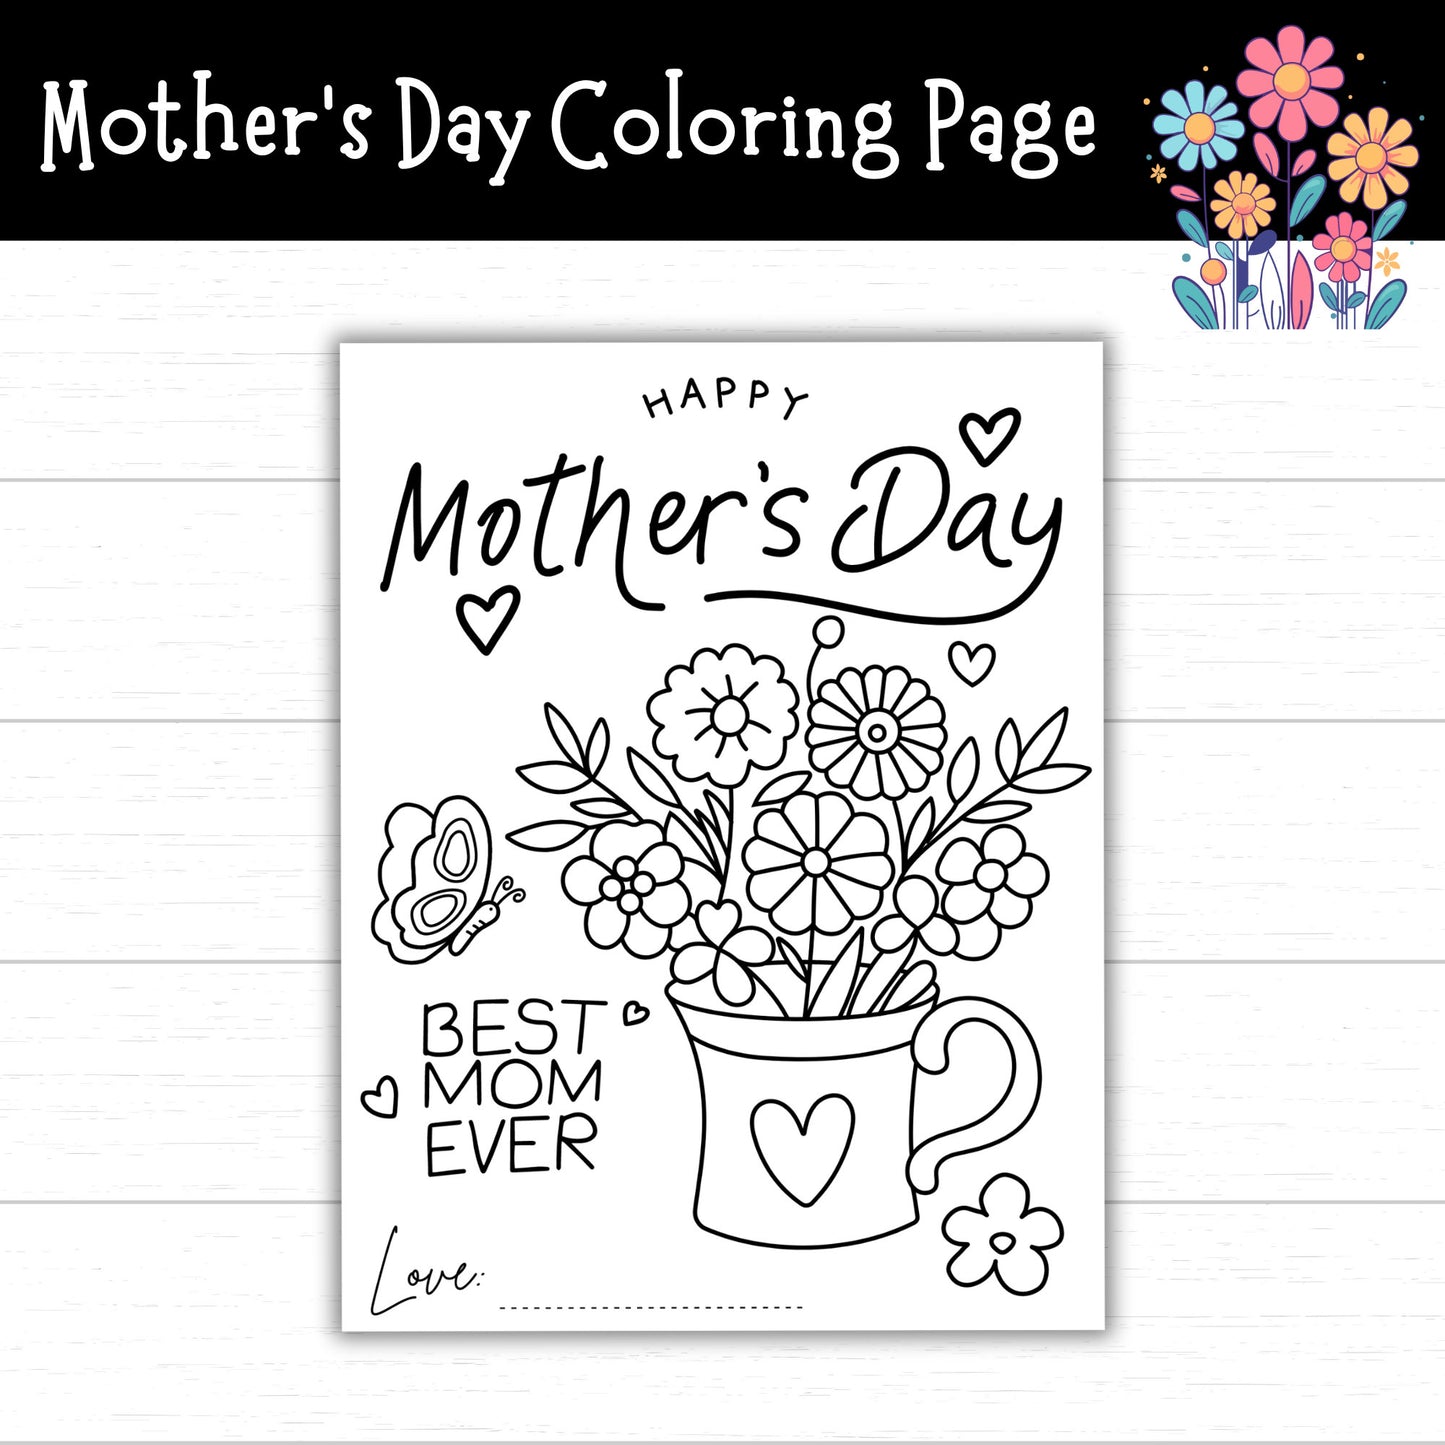 Mother's Day Coloring Page for Kids, Printable Mother's Day Card, Mother's Day Printables, Printable Cards, Flower Coloring Pages